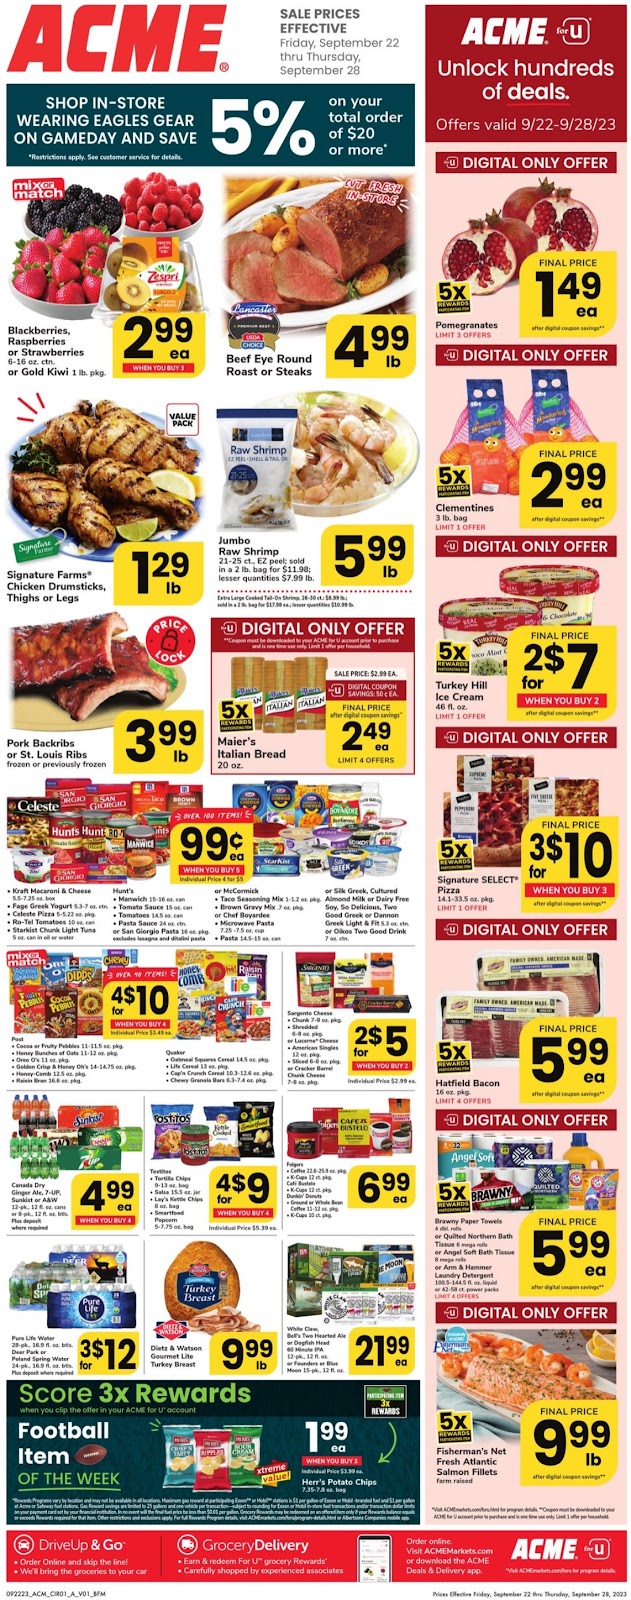 Acme Weekly Ad - 1